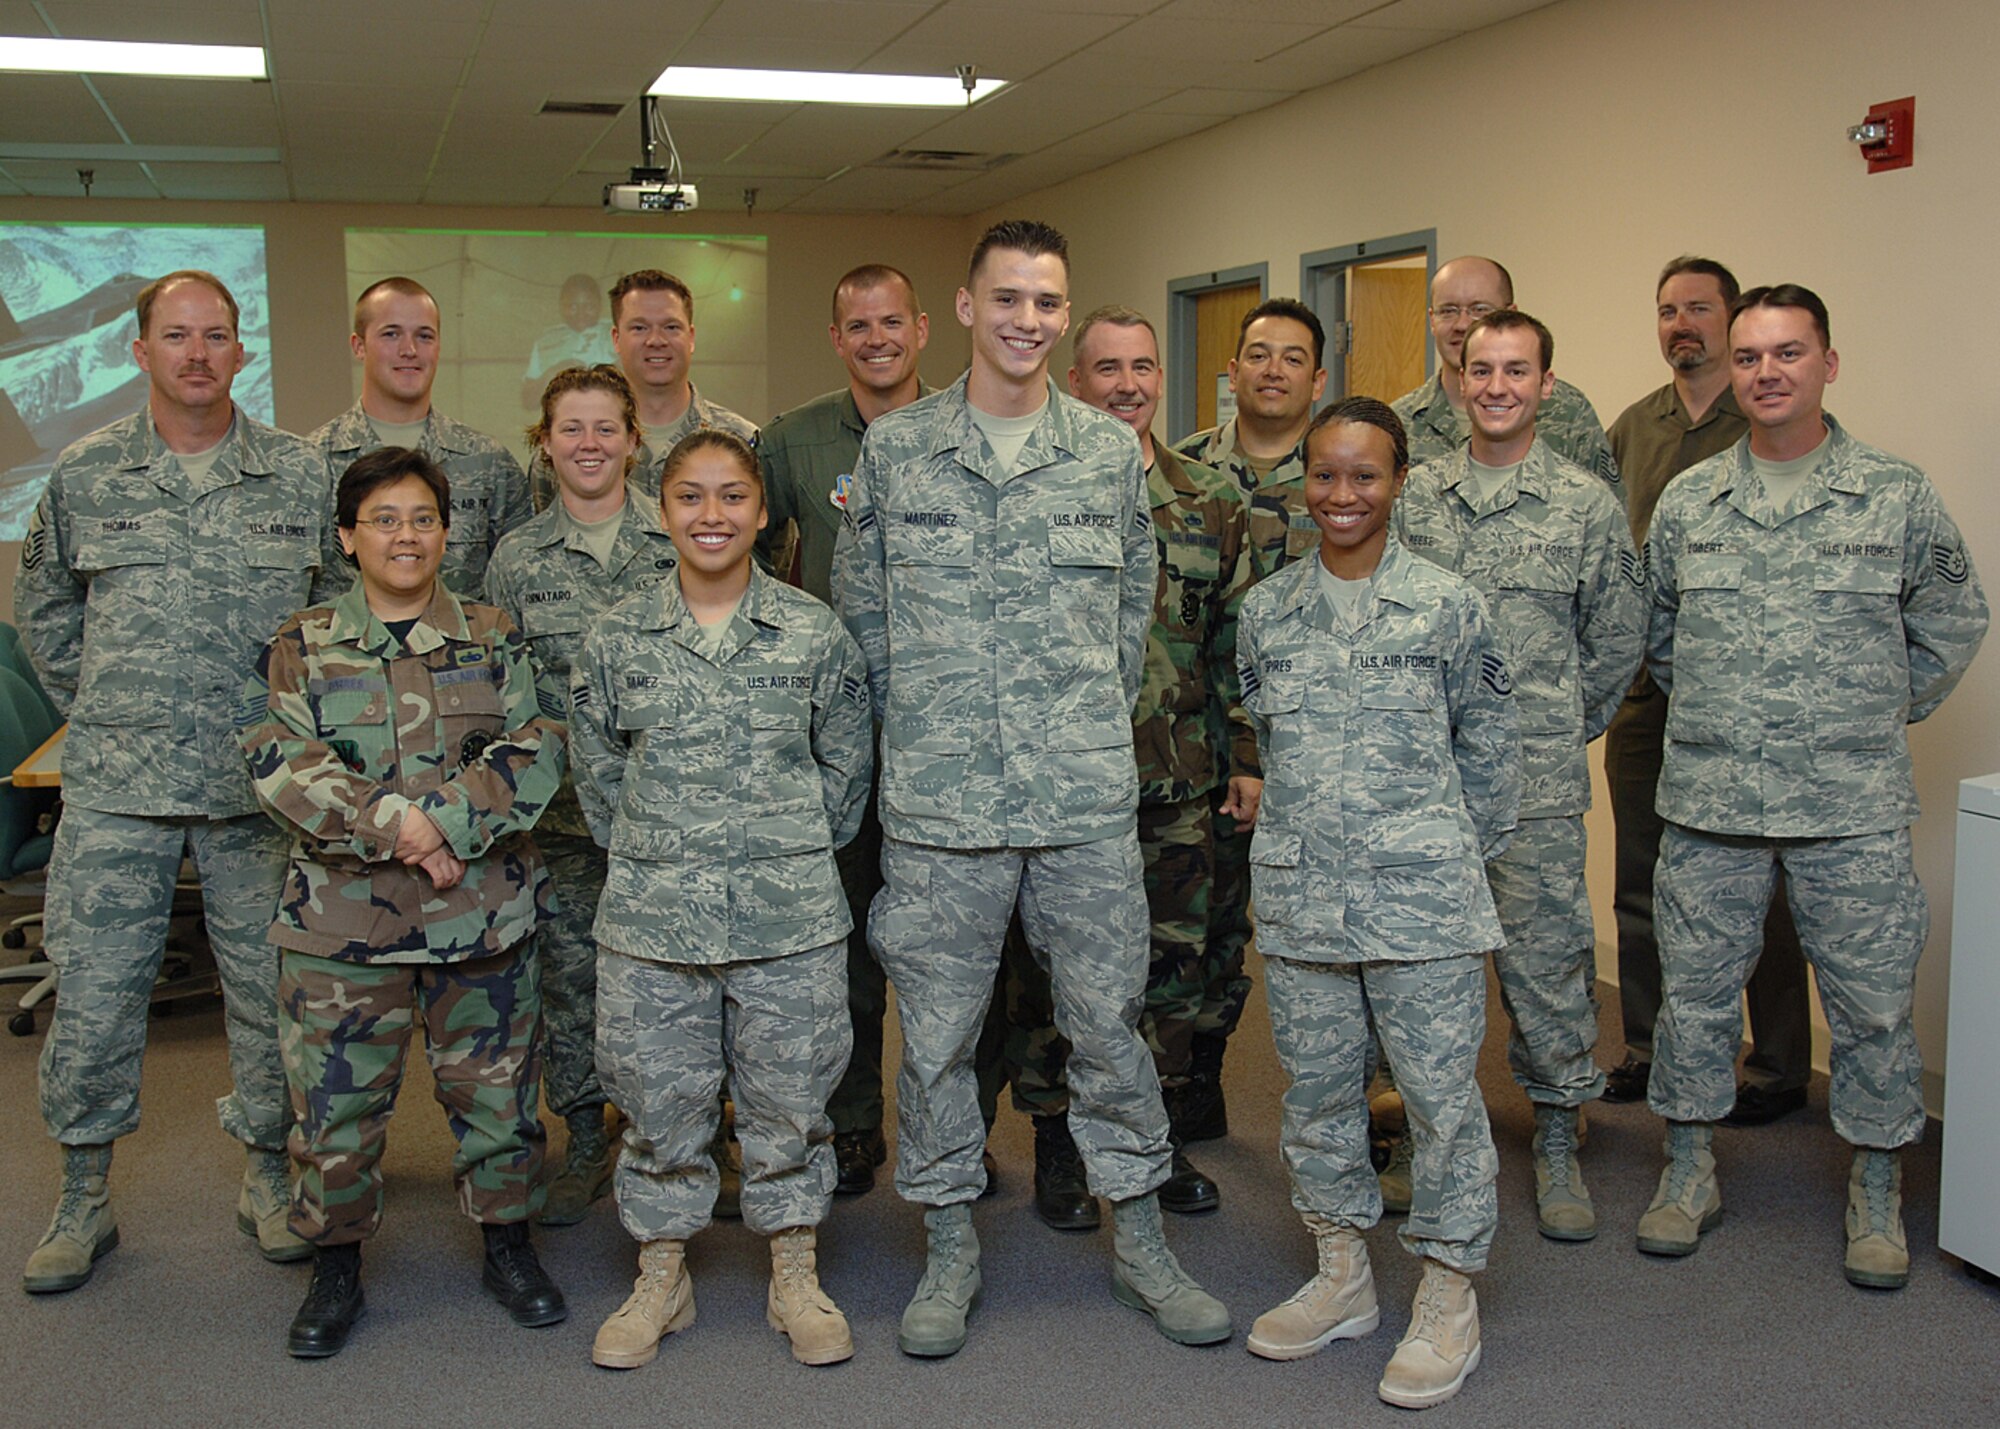 Recently deployed Airmen from 49th Logistics Readiness Squadron, Staff Sgt. Tamea Spires, Senior Airman Corina Gamez and Airman 1st Class Richard Martinez, pose for a group photo with Col. Michael McGee, 49th Fighter Wing vice commander and other members of the 49th LRS.  Sergeant Spires, Airmen Gamez, Martinez were deployed to Qatar for four months.  (U.S. Air Force photo by Airman 1st Class John D. Strong II)